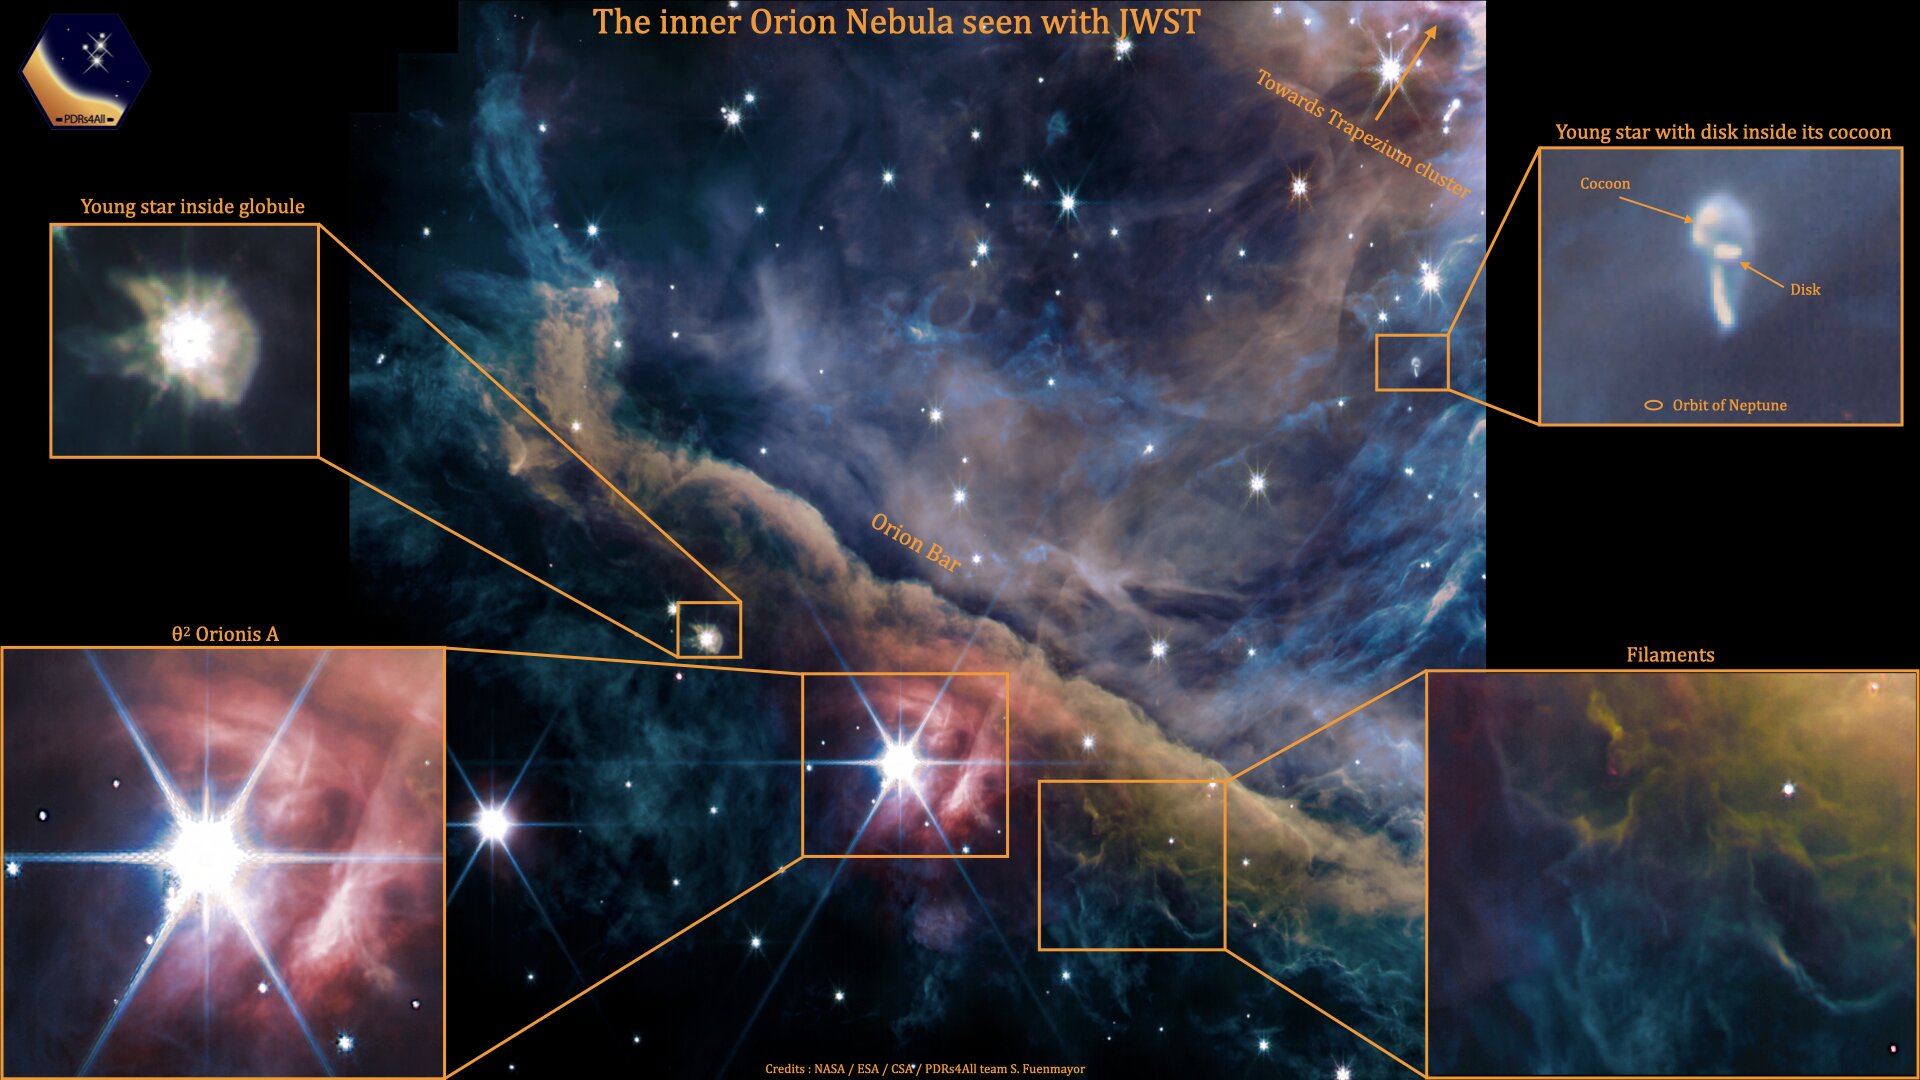 The James Webb Telescope Discovers Mysterious Objects in the Orion Nebula